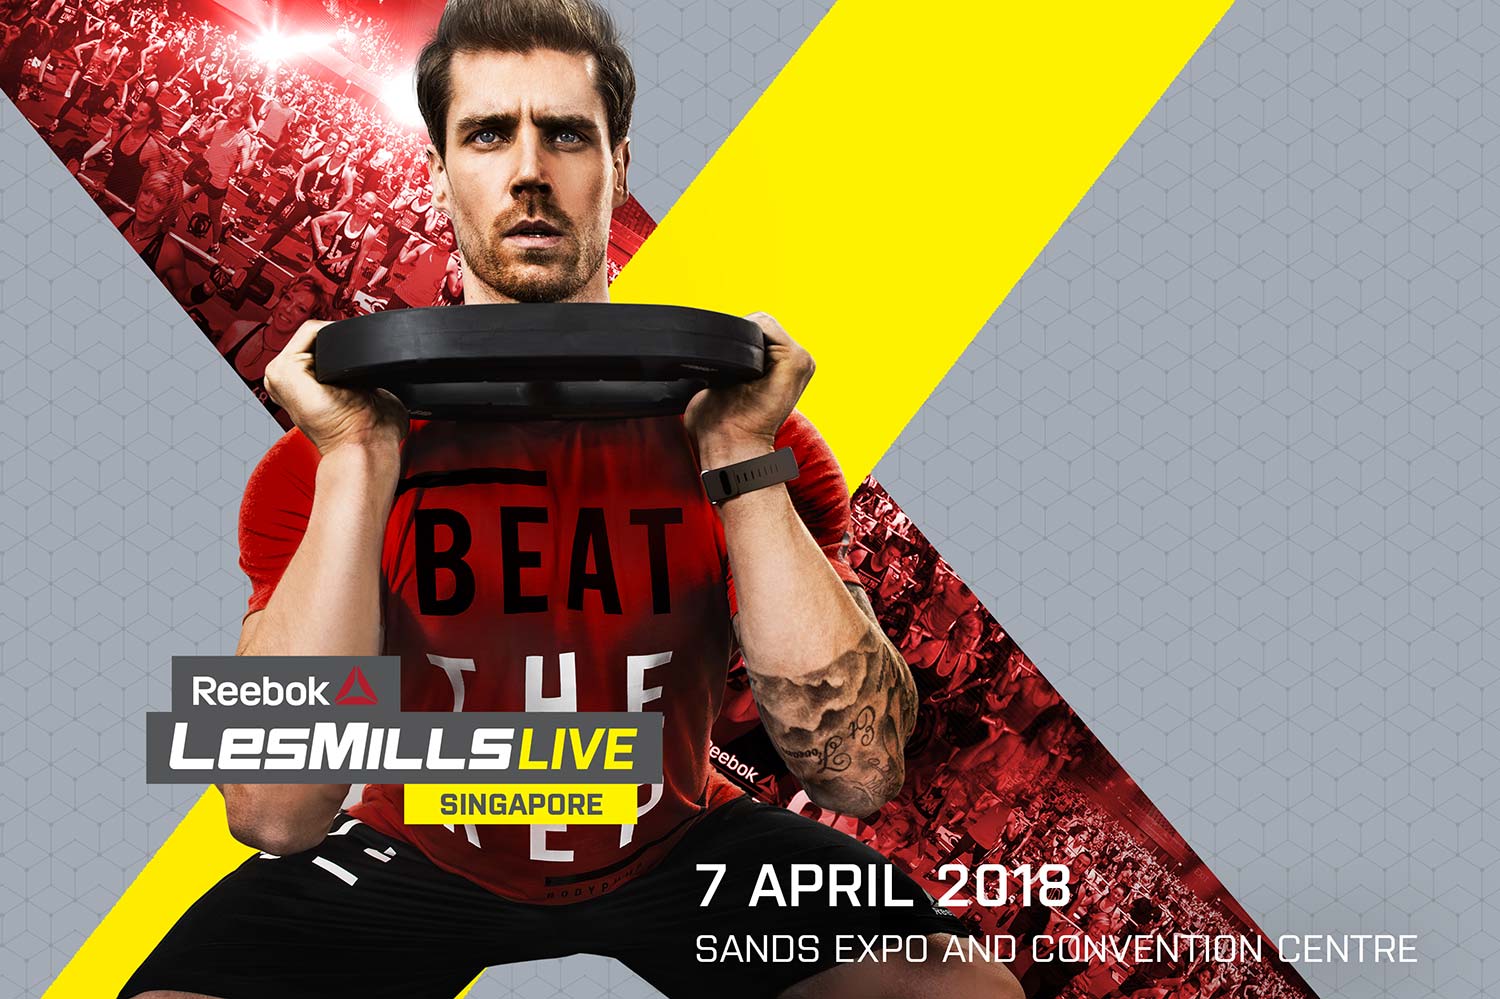 Reebok LES MILLS LIVE in Singapore for the First Time